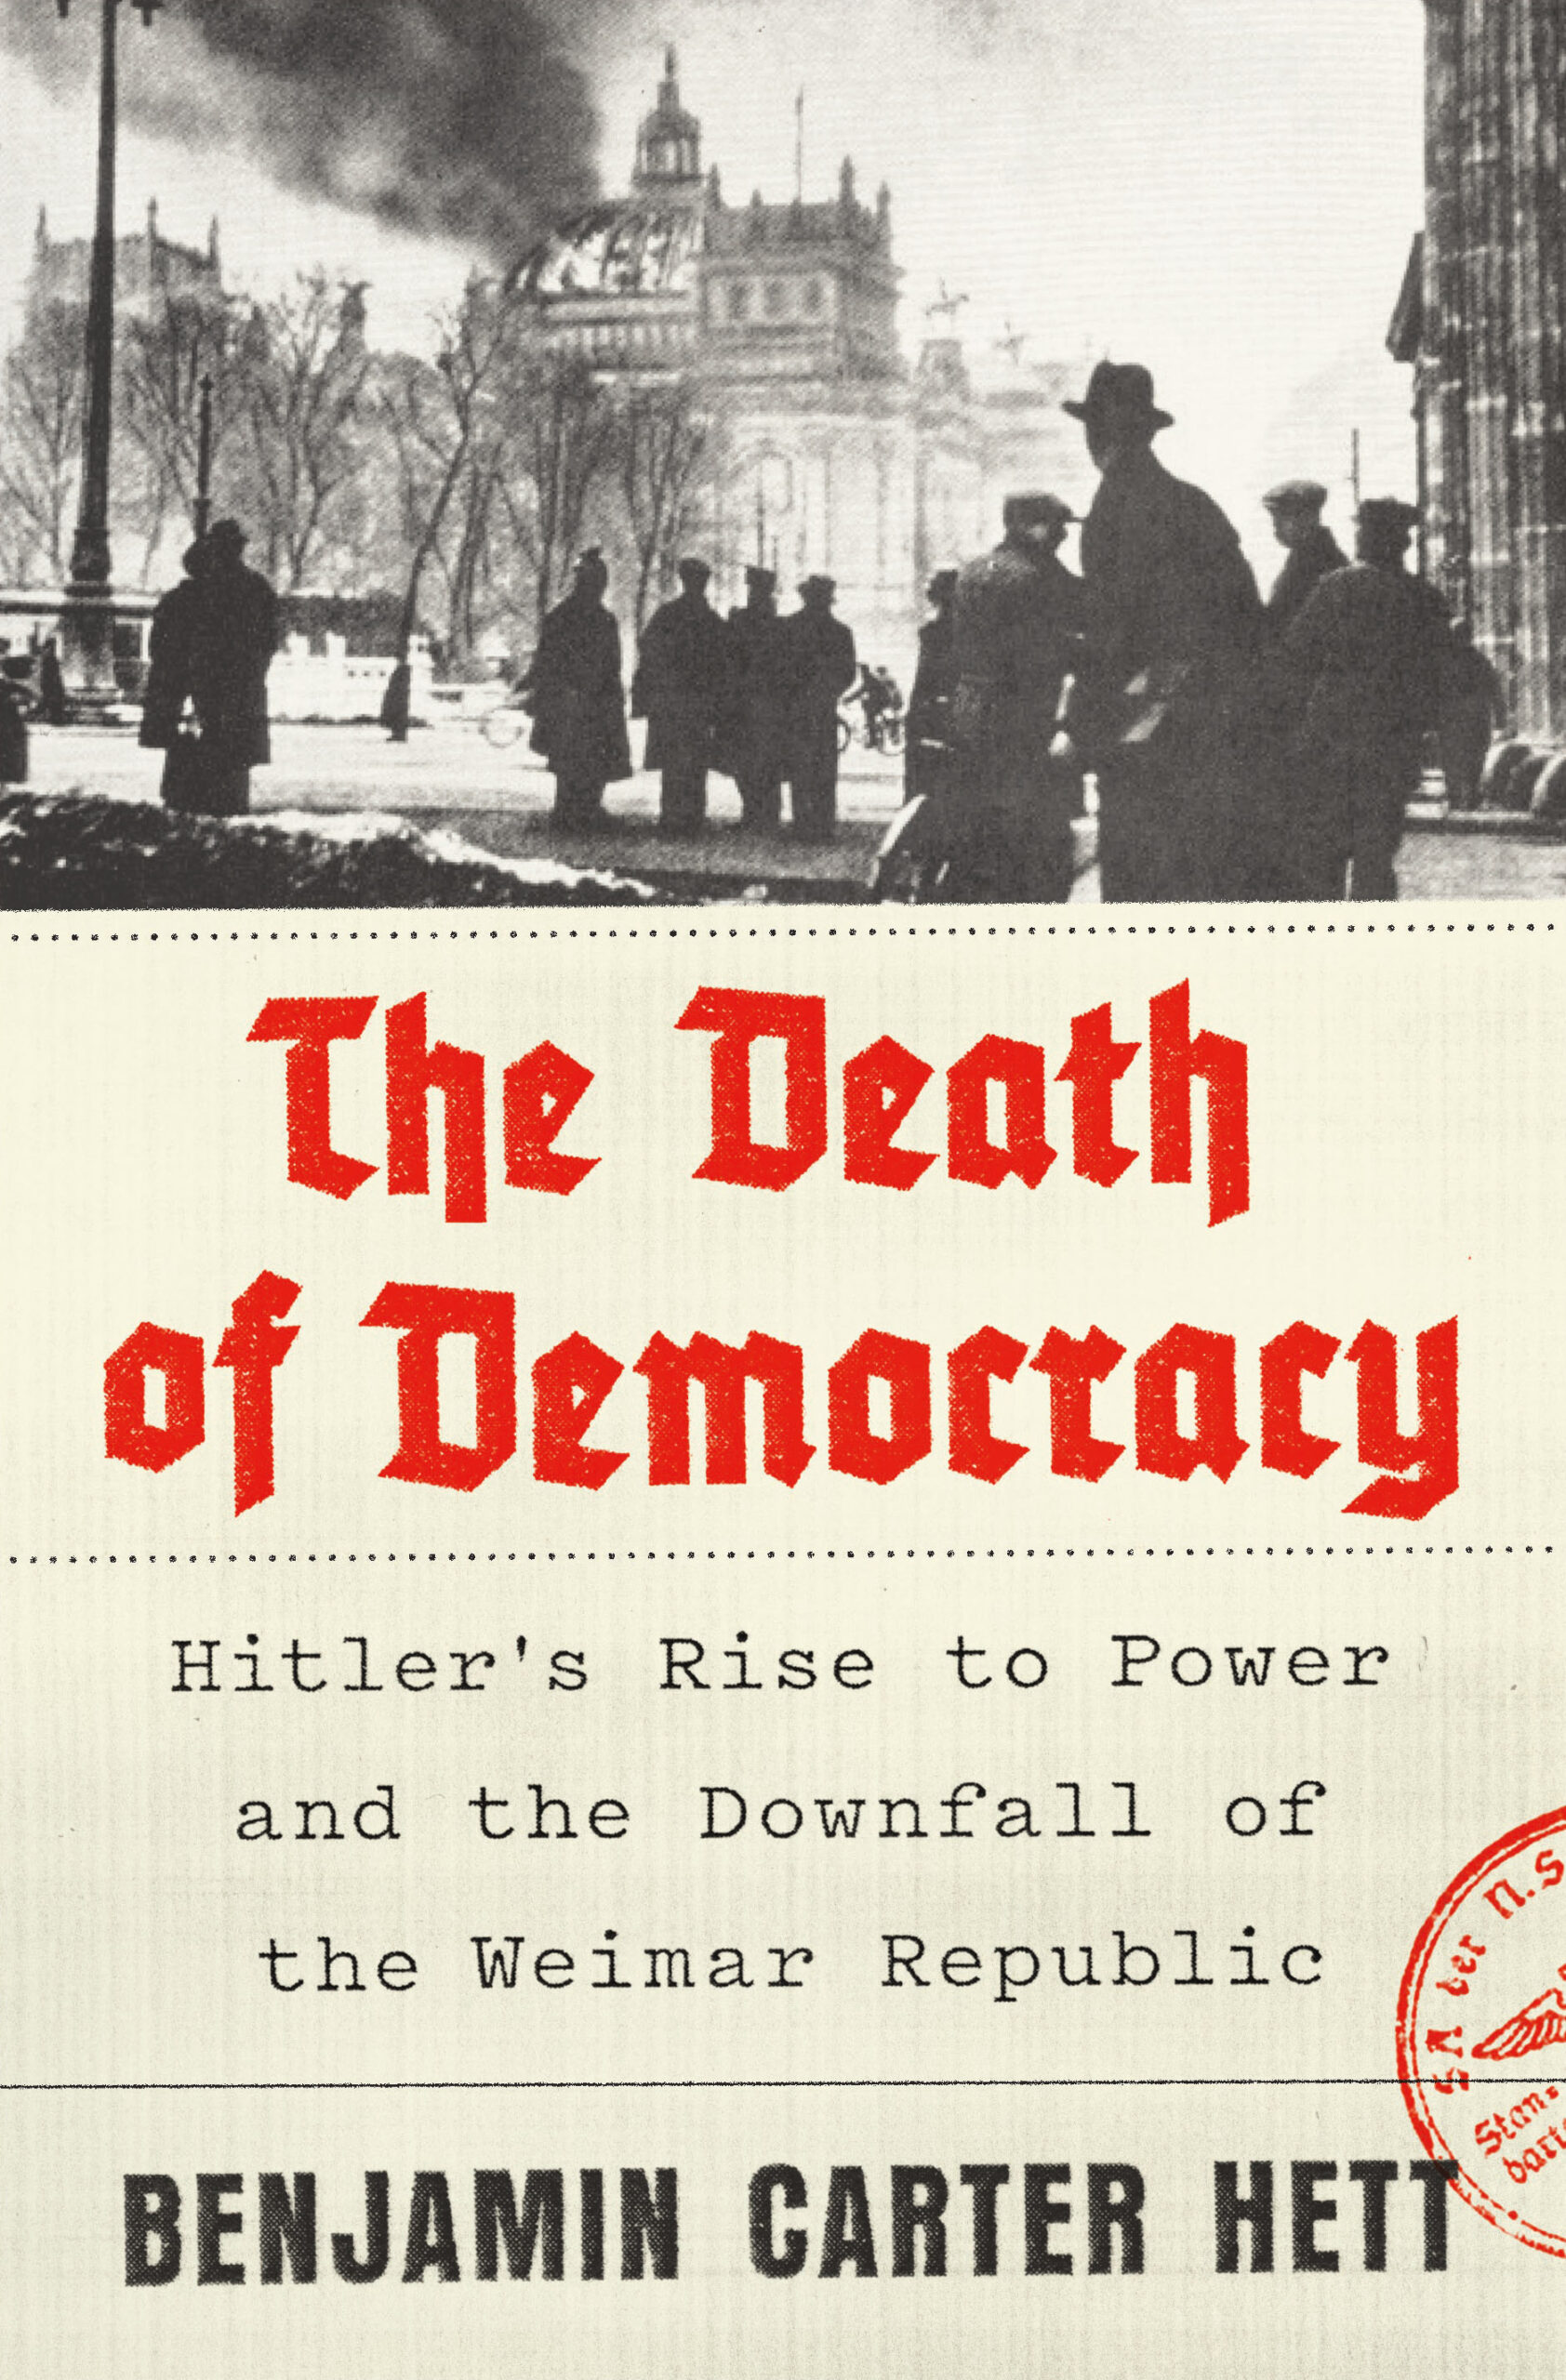 Benjamin Carter Hett, "The Death of Democracy: Hitler's Rise to Power and the Downfall of the Weimar Republic"